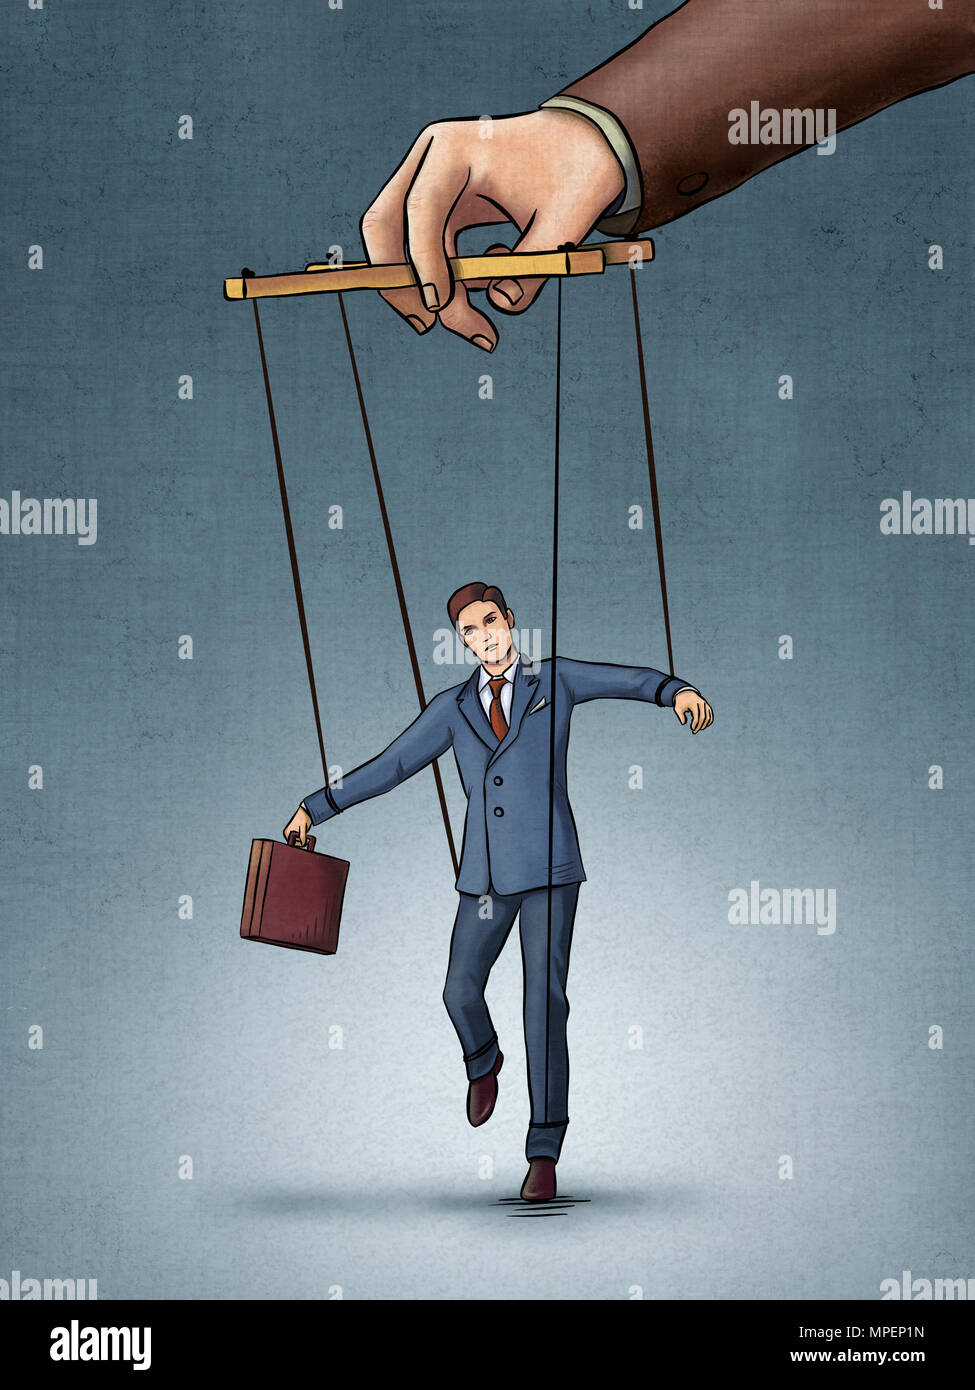 Businessman being pulled by strings like a puppet. Digital illustration, created from scratch with no reference used. Stock Photo